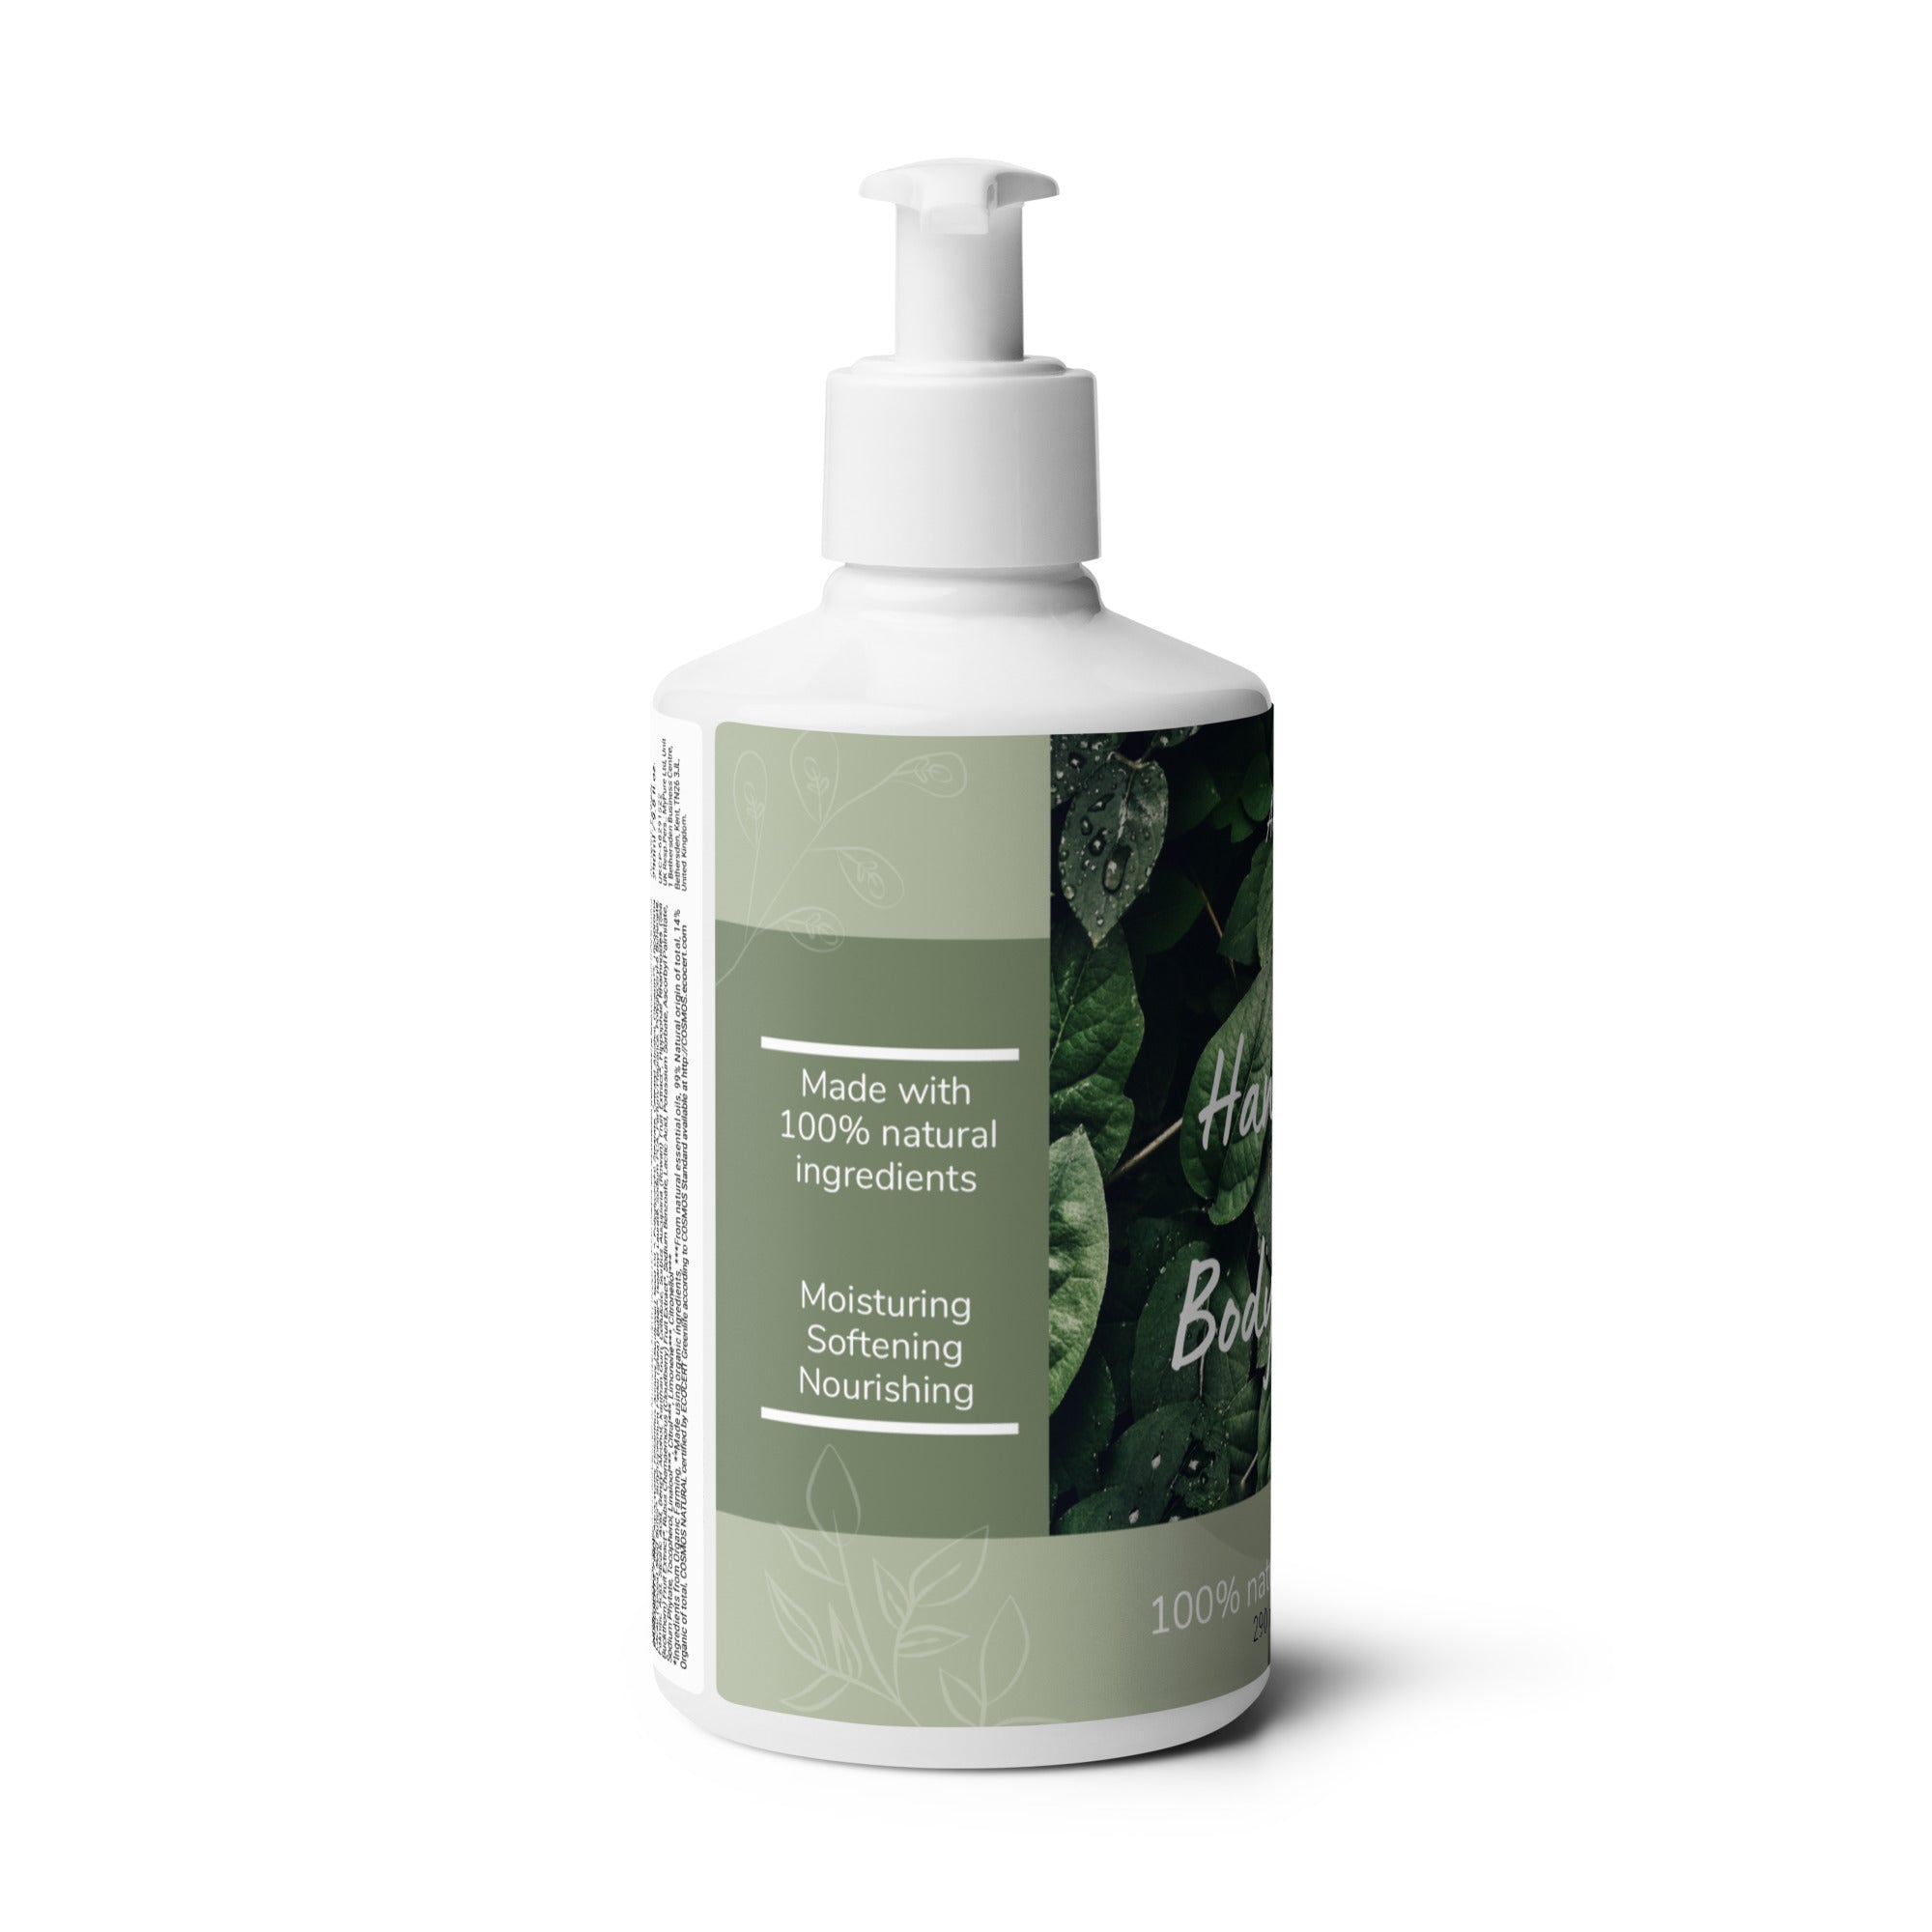 Anacotte Refreshing Hand & Body Lotion: Infused with Natural Ingredients